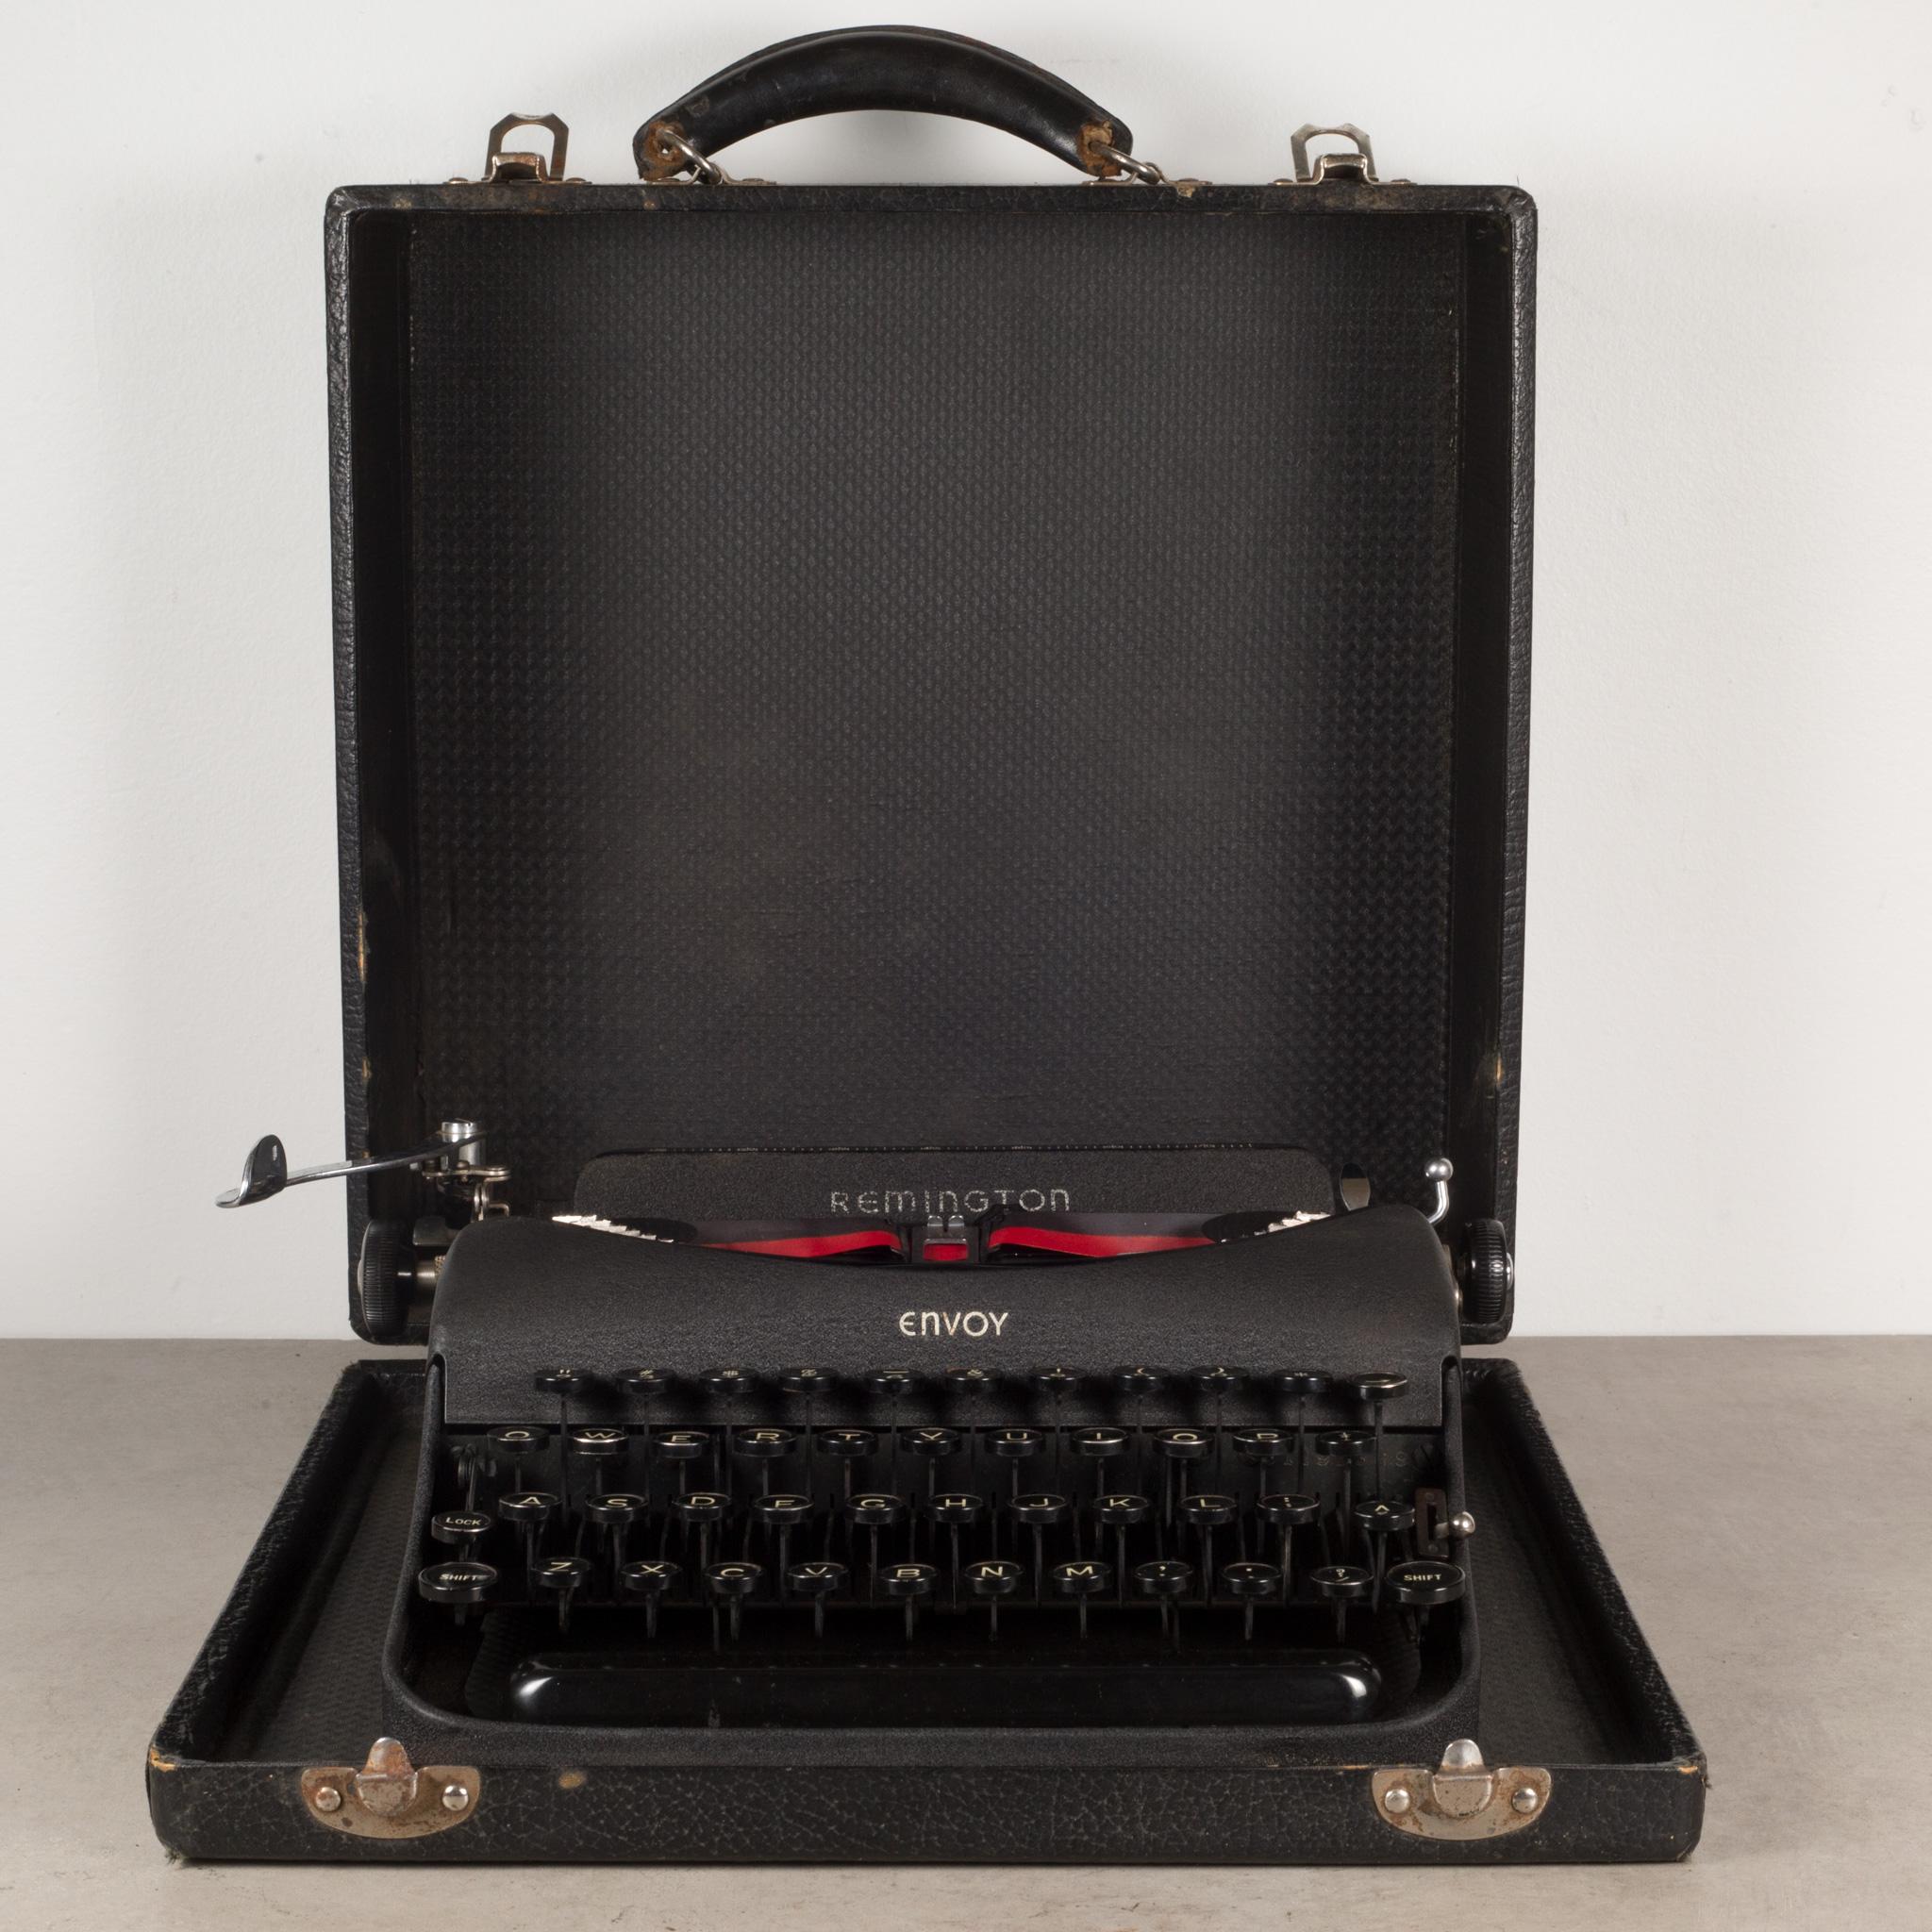 ABOUT

A refurbished Remington Envoy typewriter in black crinkle finish with original case. The keys are white letters on a black background. This typewriter is very clean and has been refurbished. It has smooth typing and the carriage advances